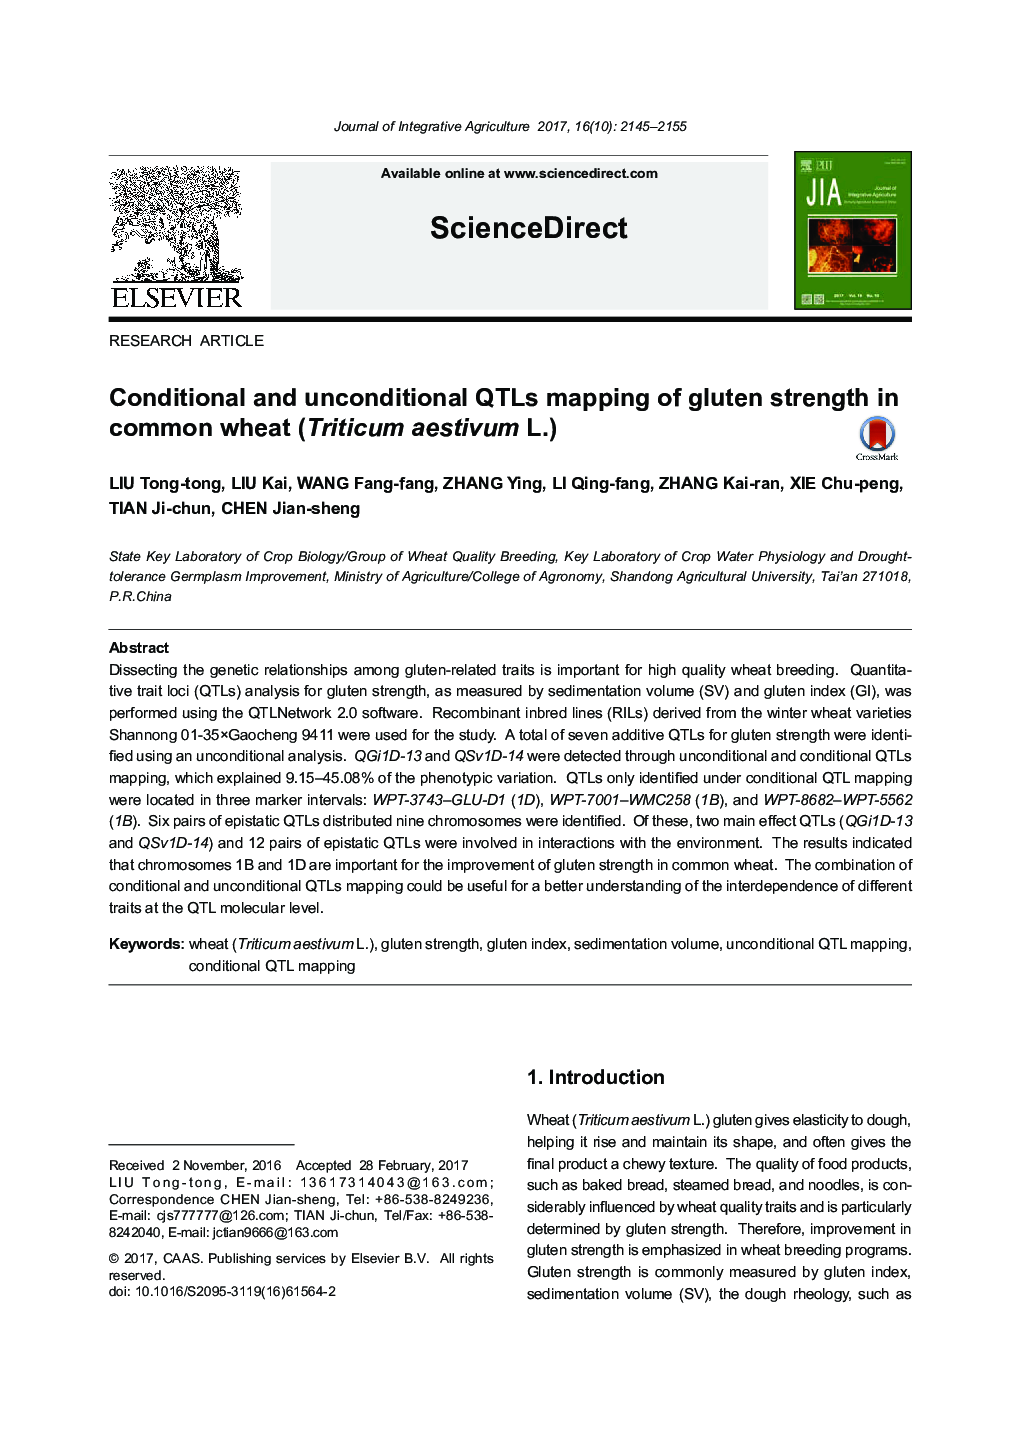 Conditional and unconditional QTLs mapping of gluten strength in common wheat (Triticum aestivum L.)